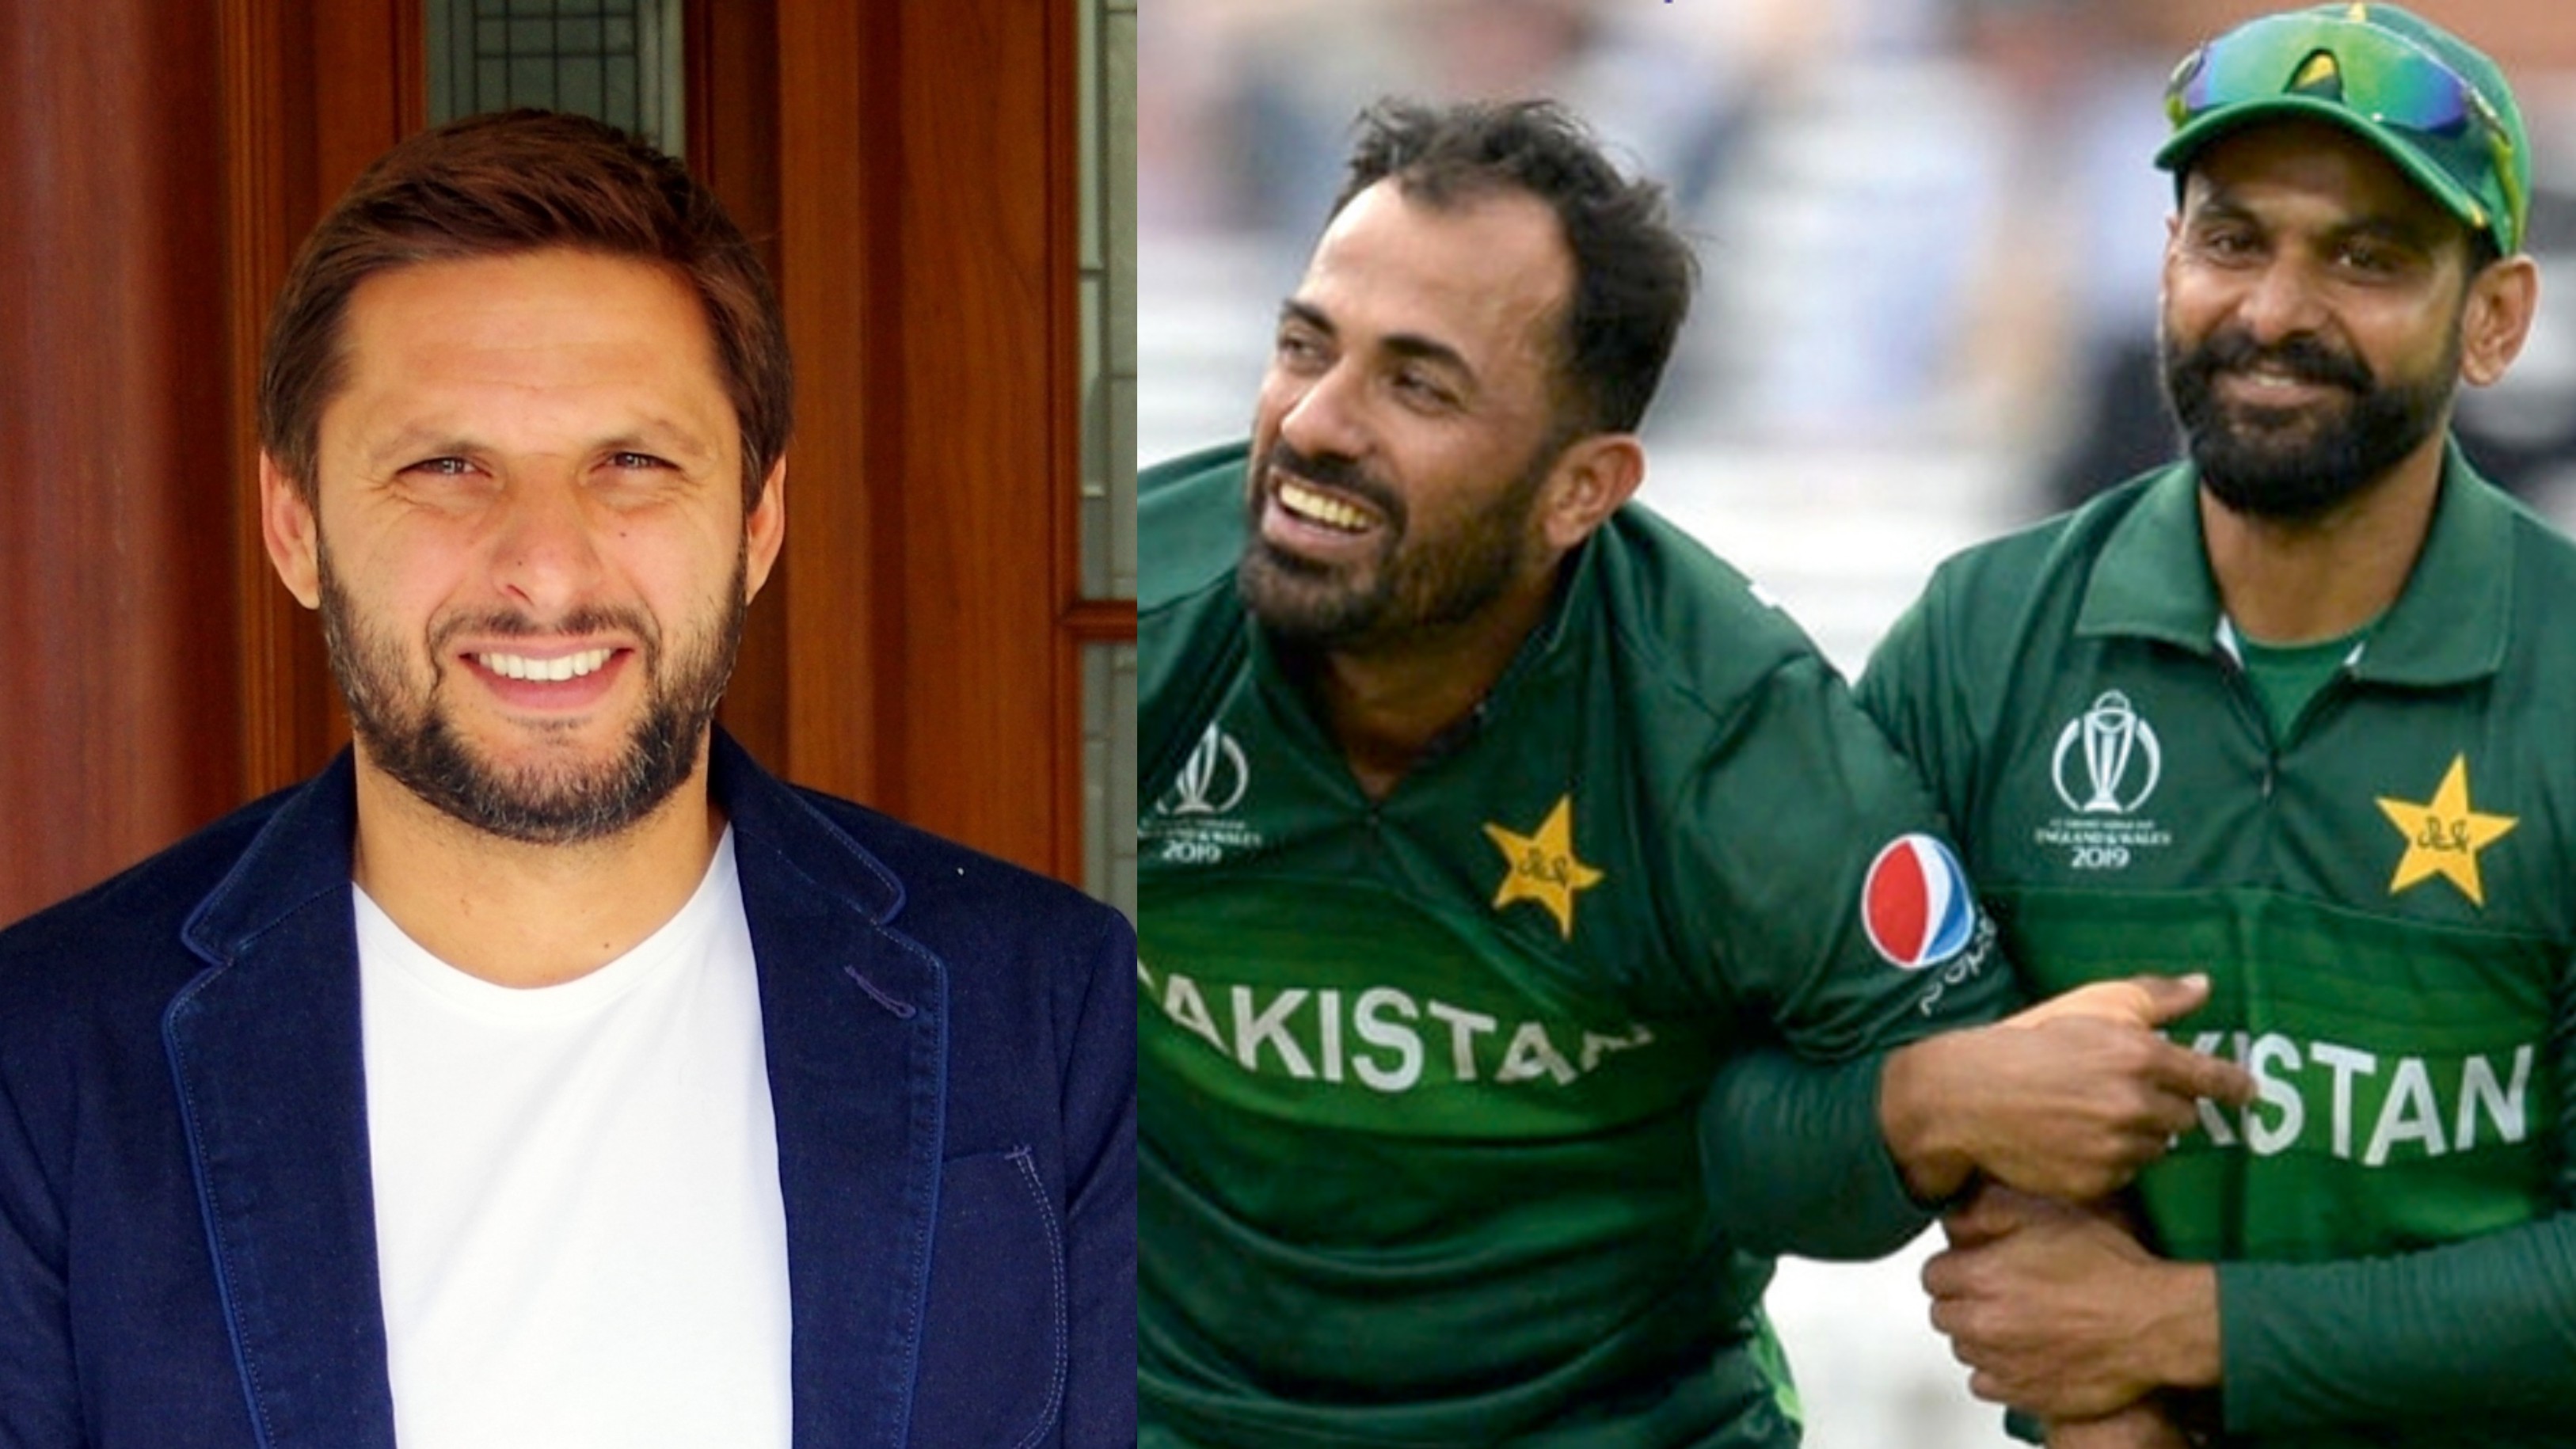 Shahid Afridi sends prayers for quick recovery of COVID-19 positive Pakistan cricketers